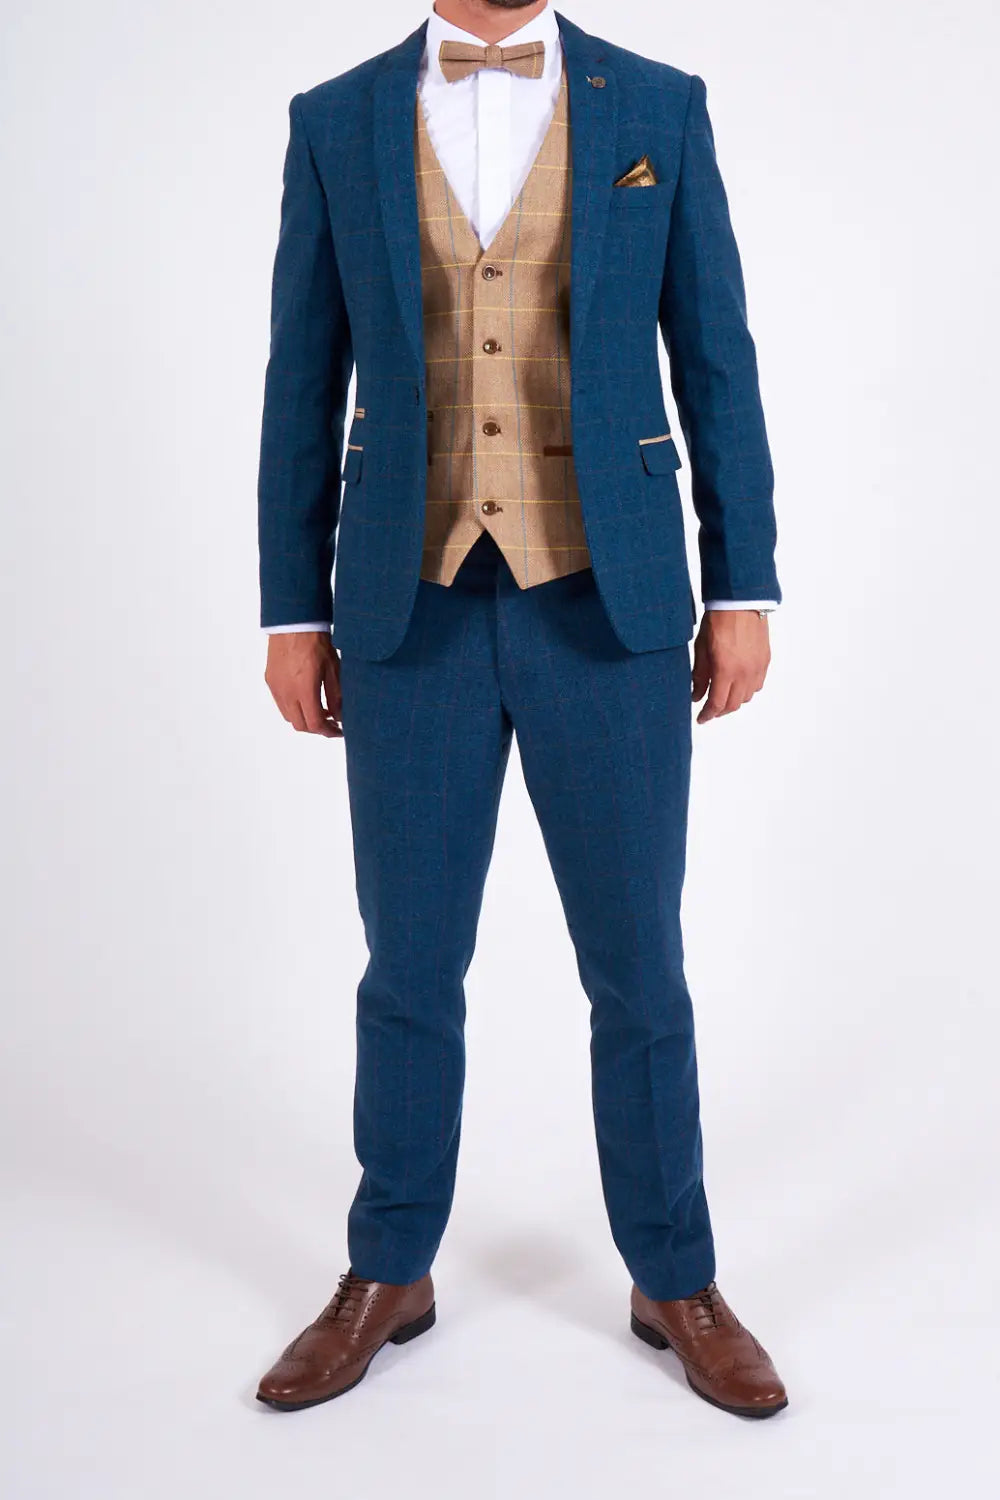 Marc Darcy Suits at menswearr.com